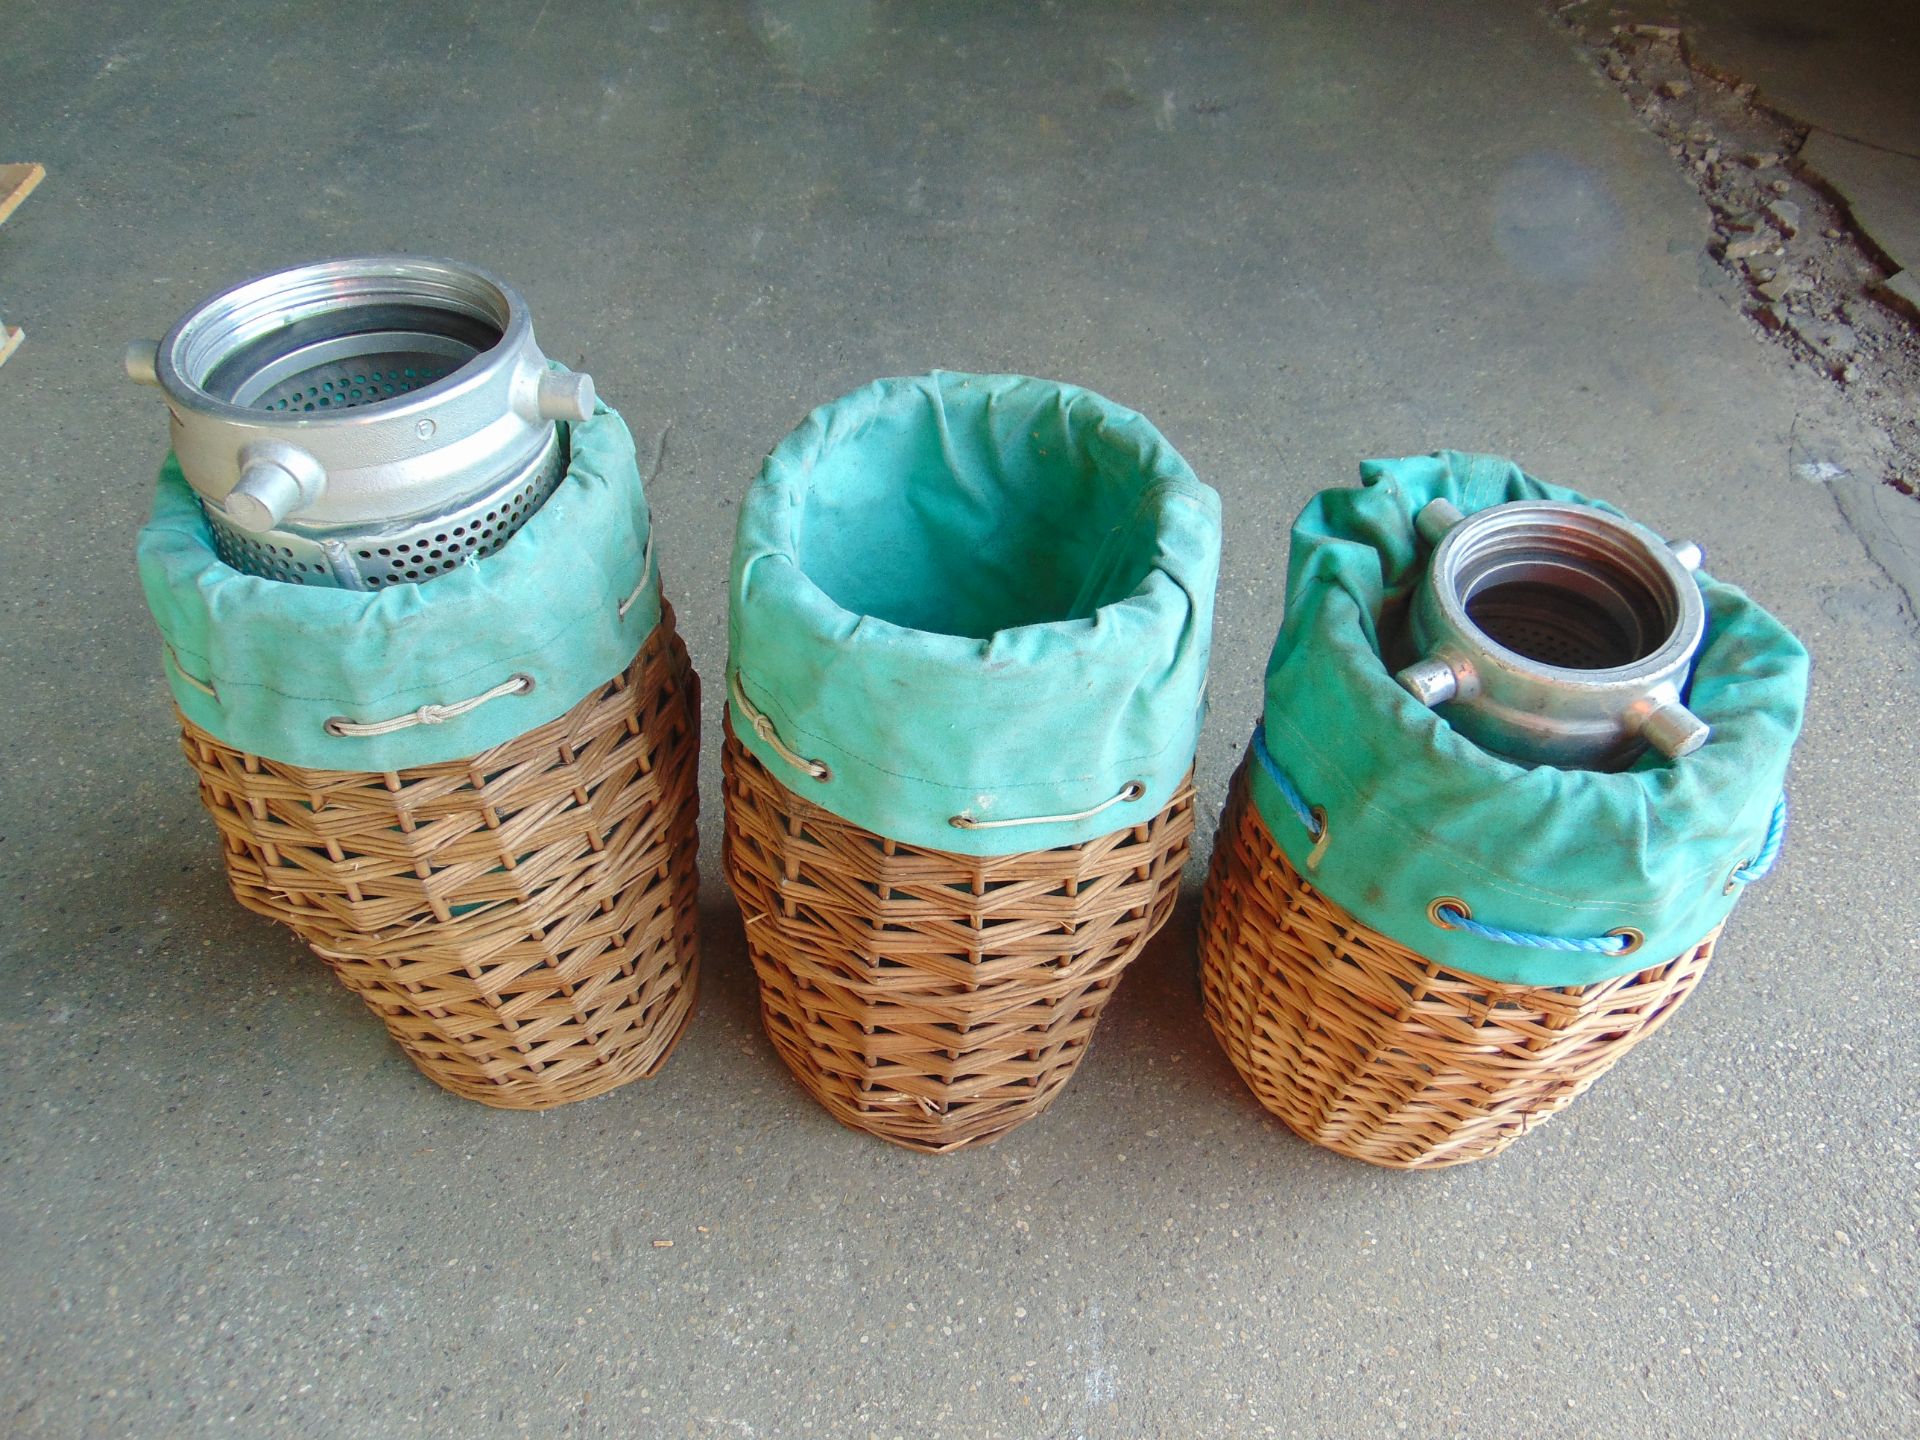 2 x Strainers & 3 x Strainer Baskets - Image 8 of 8